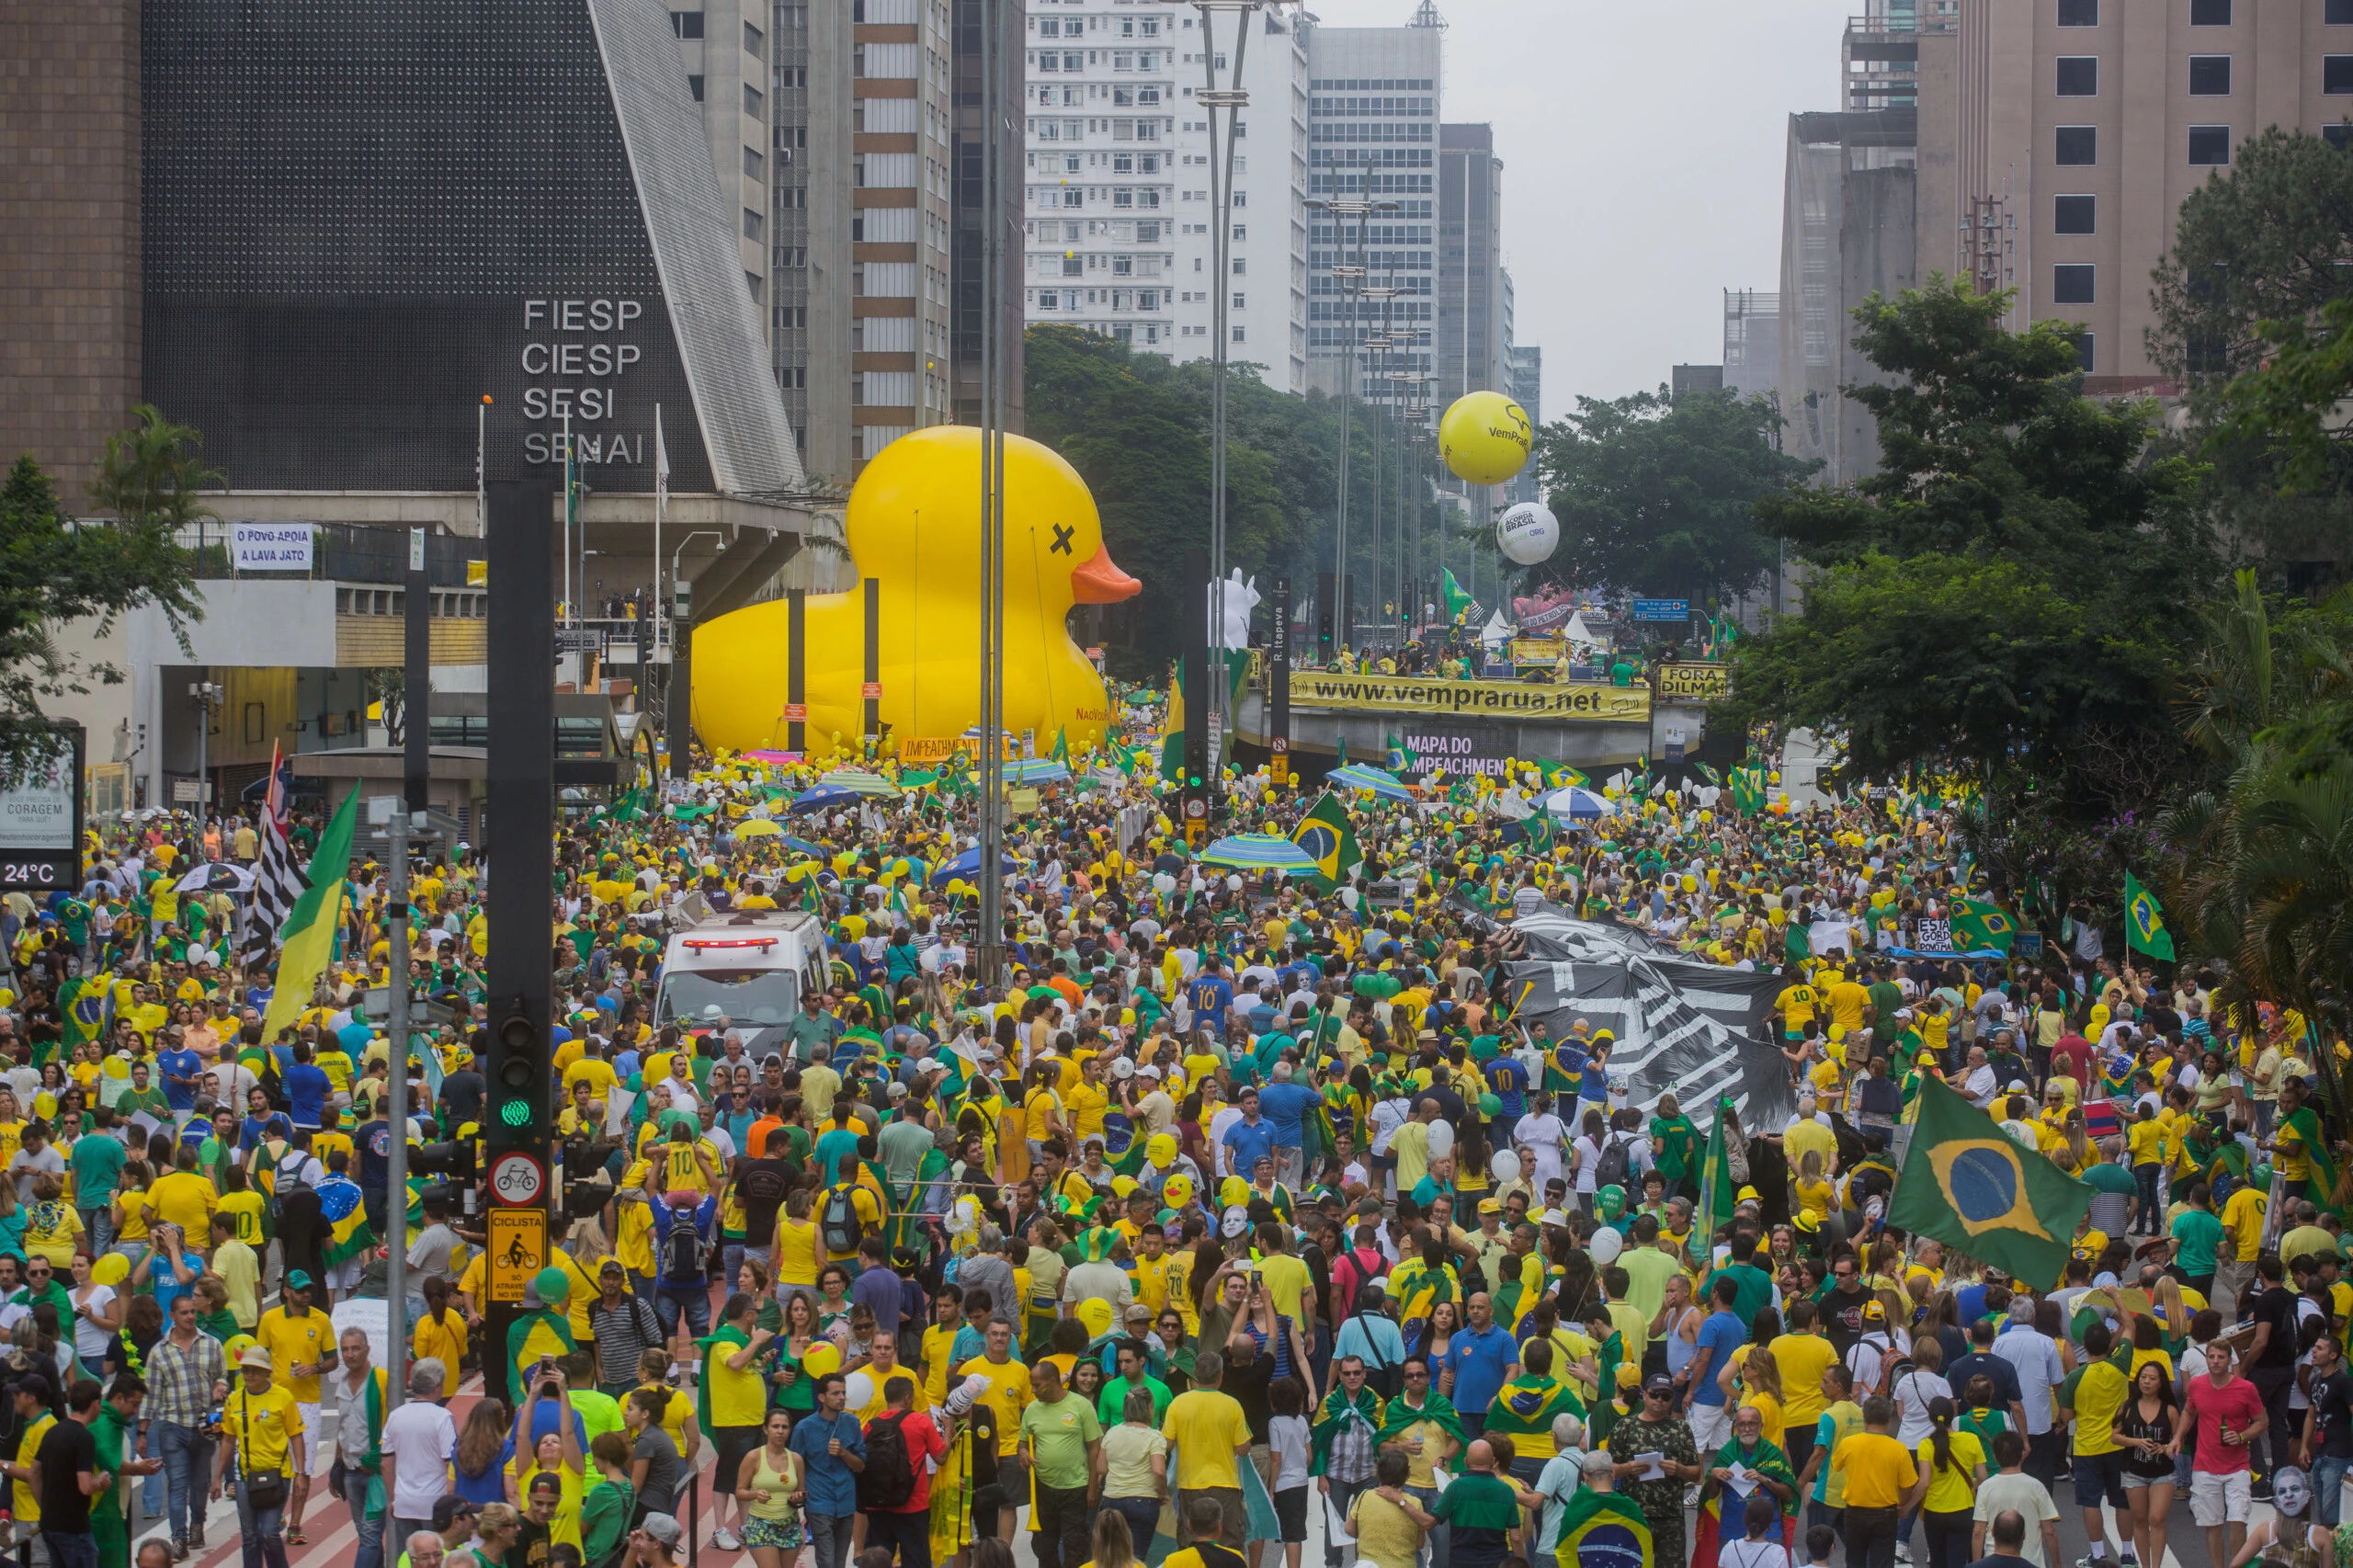 SAO PAULO, BRAZIL - MARCH 13: Protestors demonstrate demanding the removal of President Dilma Rousseff on March 13, 2016 in Sao Paulo, Brazil. Demonstrations across the country today called for President Rousseff's exit amidst a massive corruption scandal and a deep economic recession. (Photo by Victor Moriyama/Getty Images)